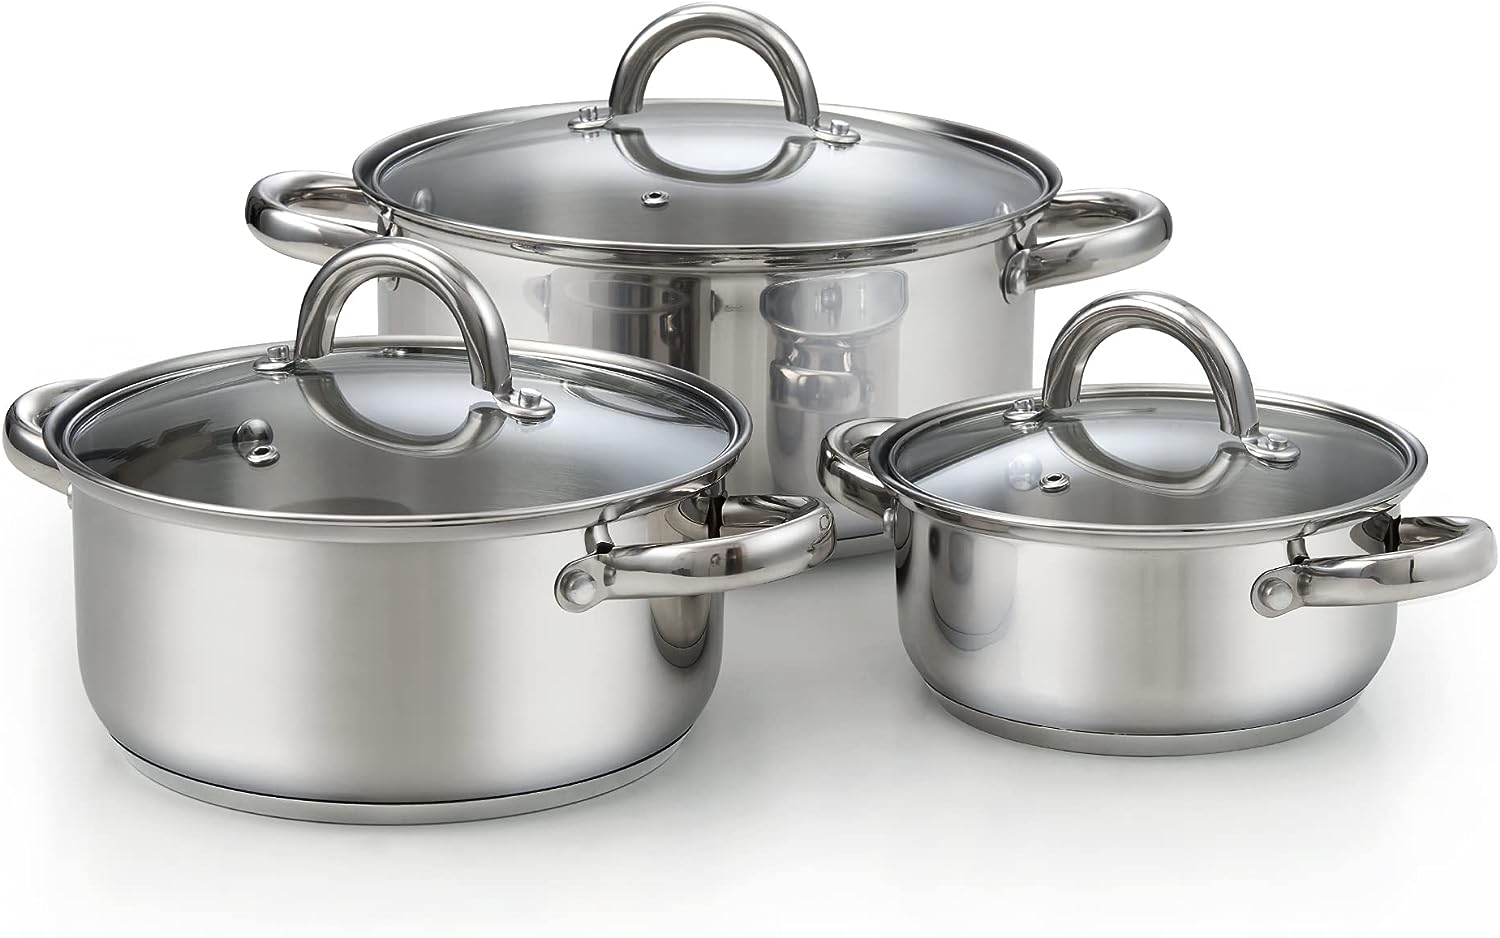 Basics Stainless Steel 11-Piece Cookware Set, Pots and Pans, Silver